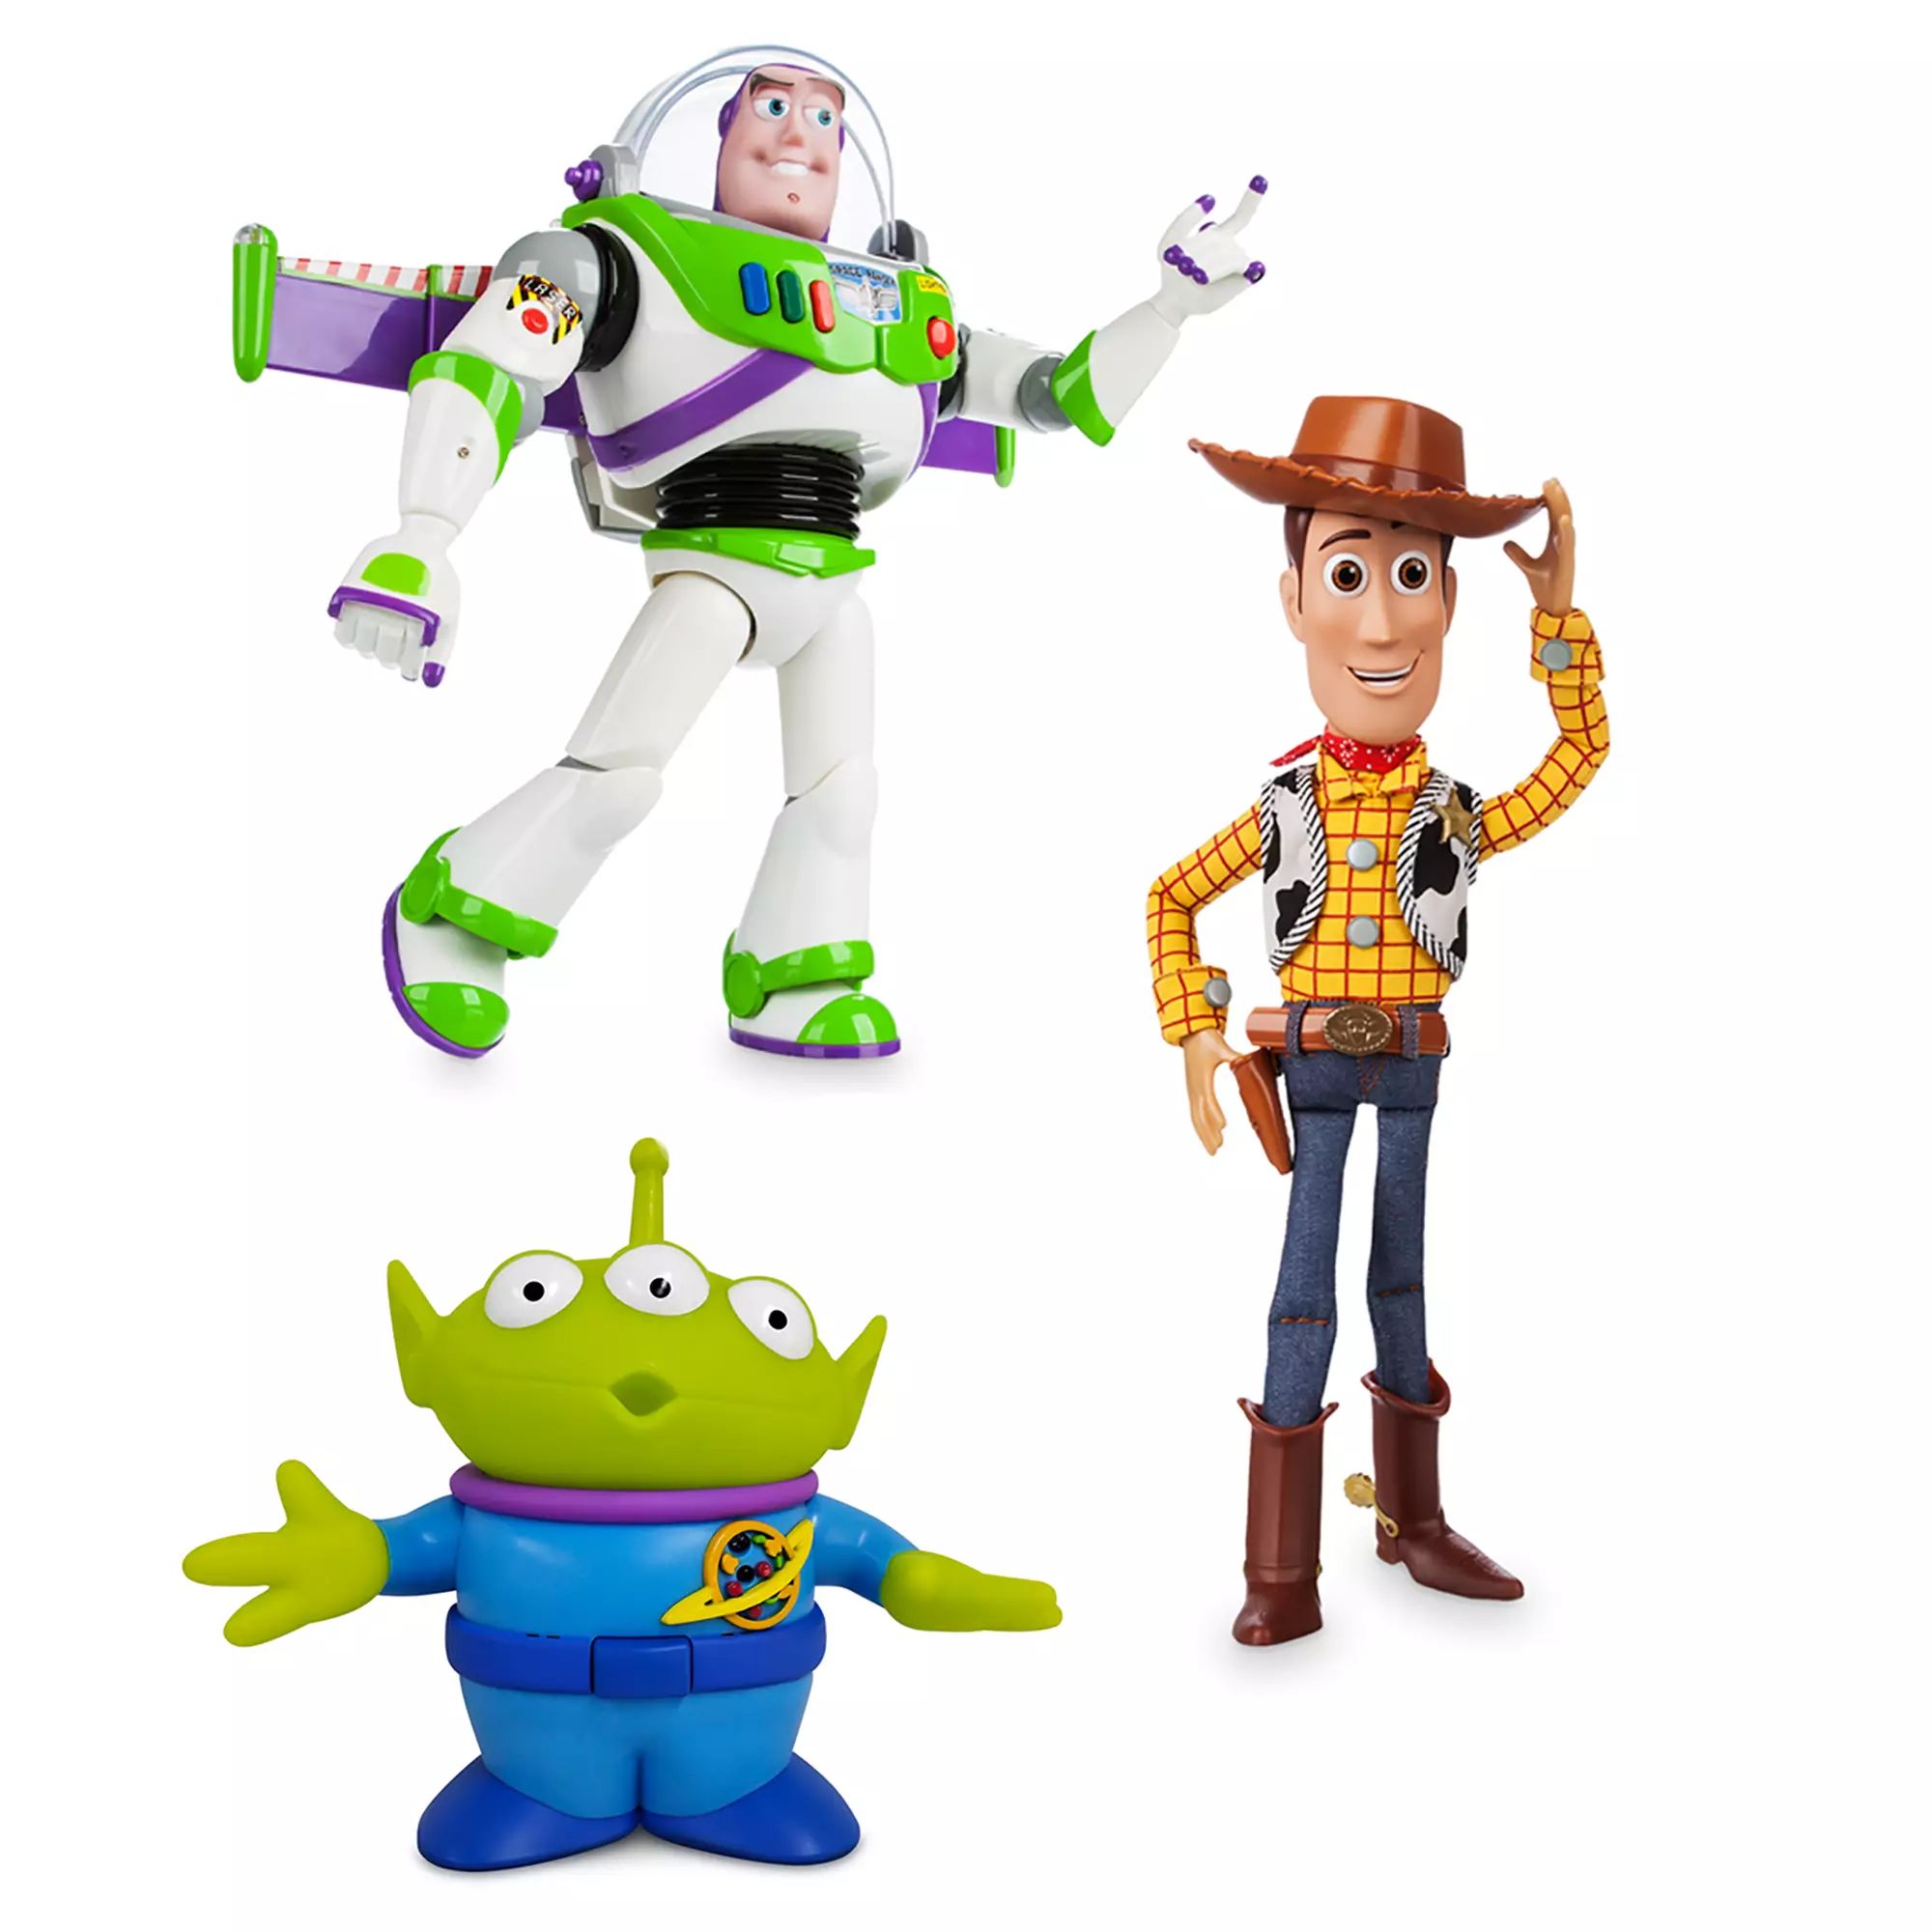 Toy Story Interactive Talking Action Figure Bundle | Disney Store